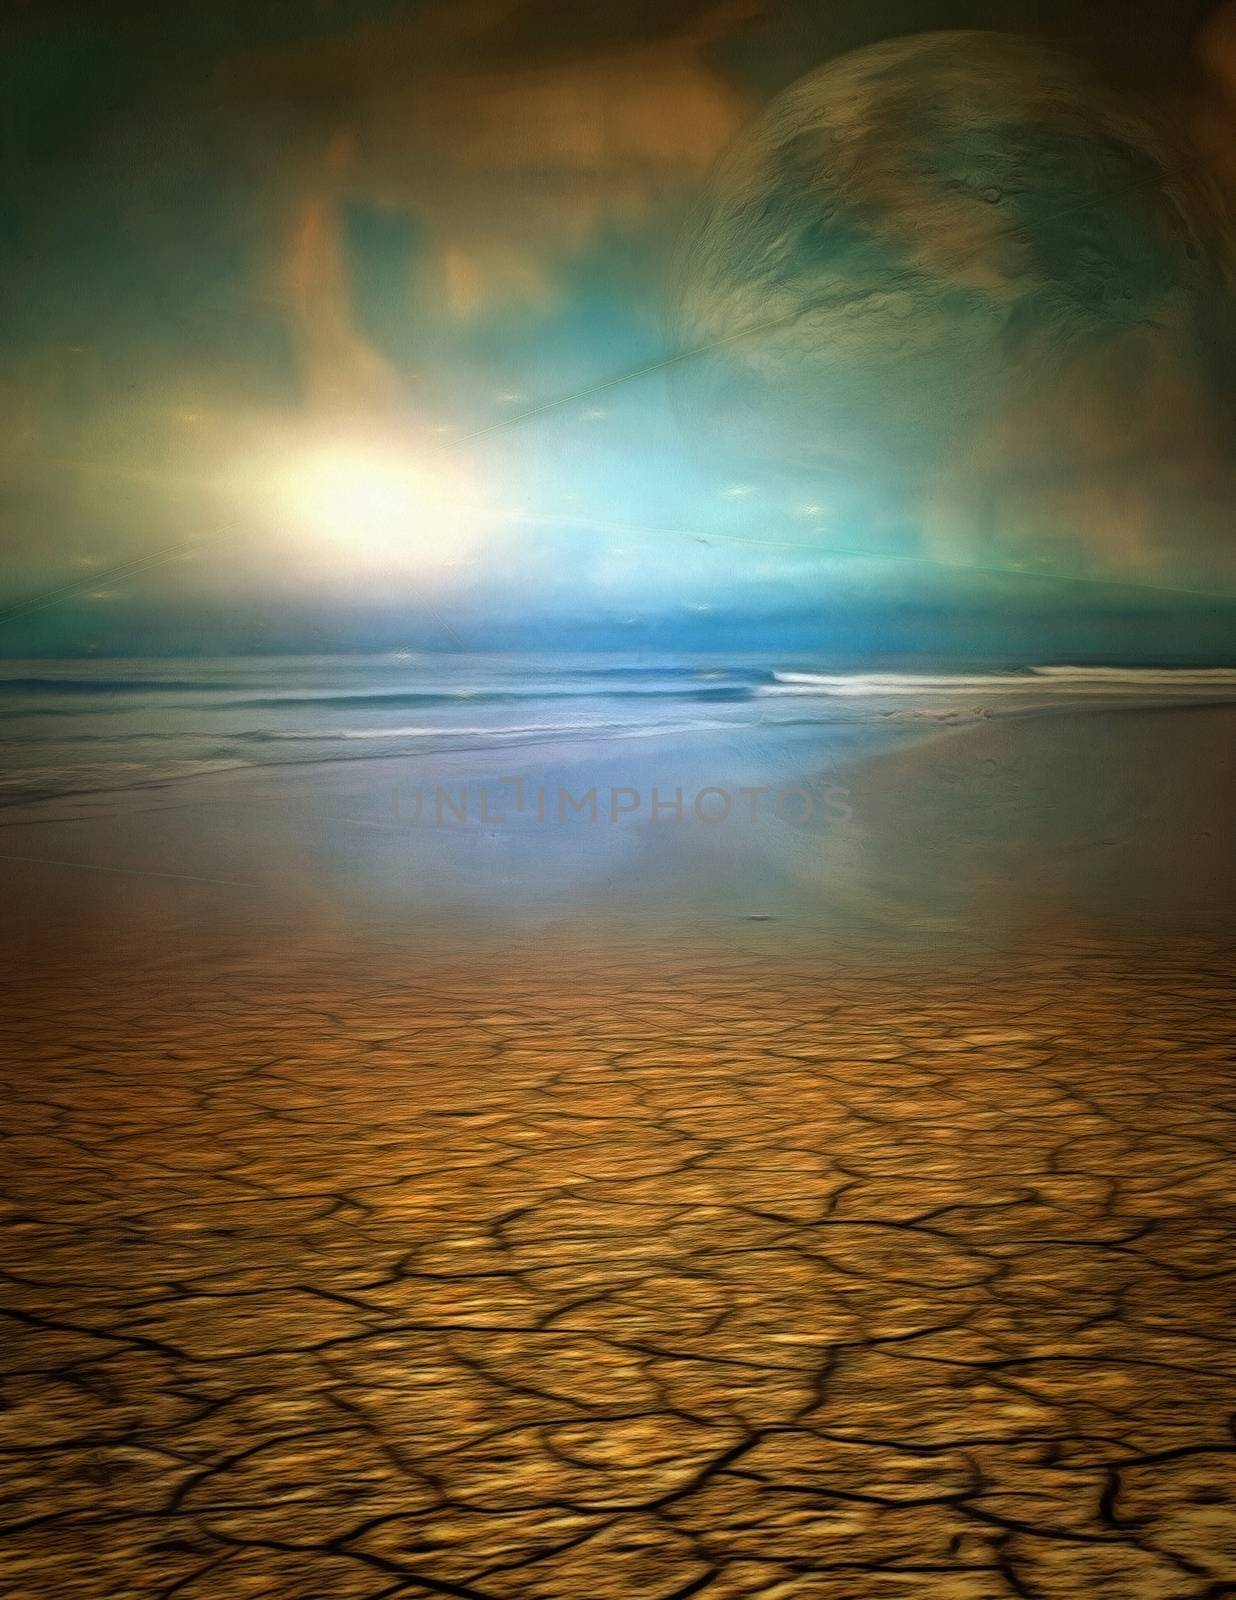 Surreal painting. Desert shore and the sea. 3D rendering